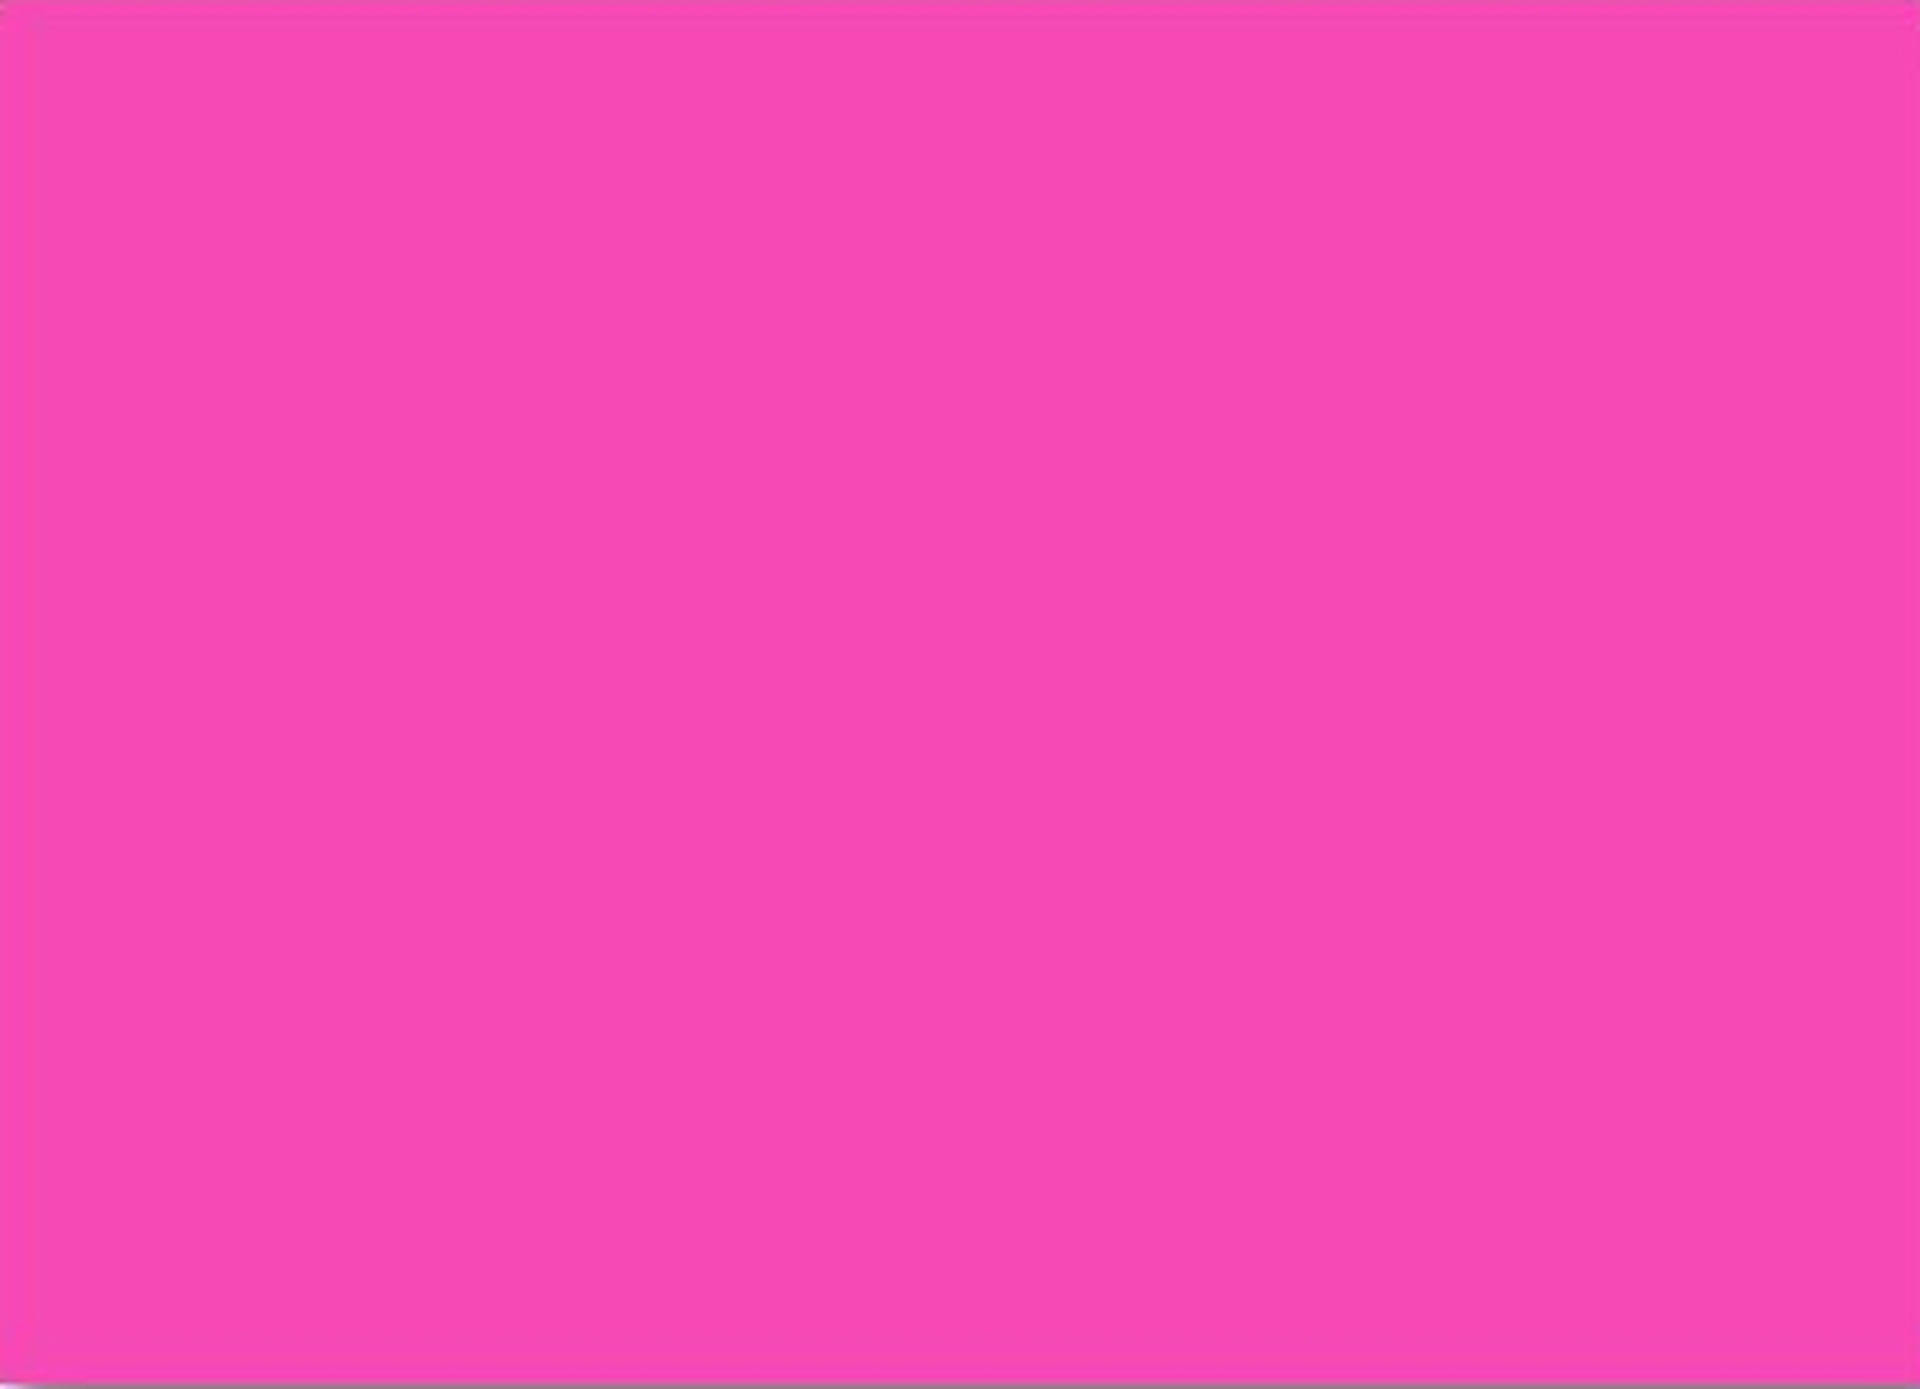 7148X5173 Pink Wallpaper and Background